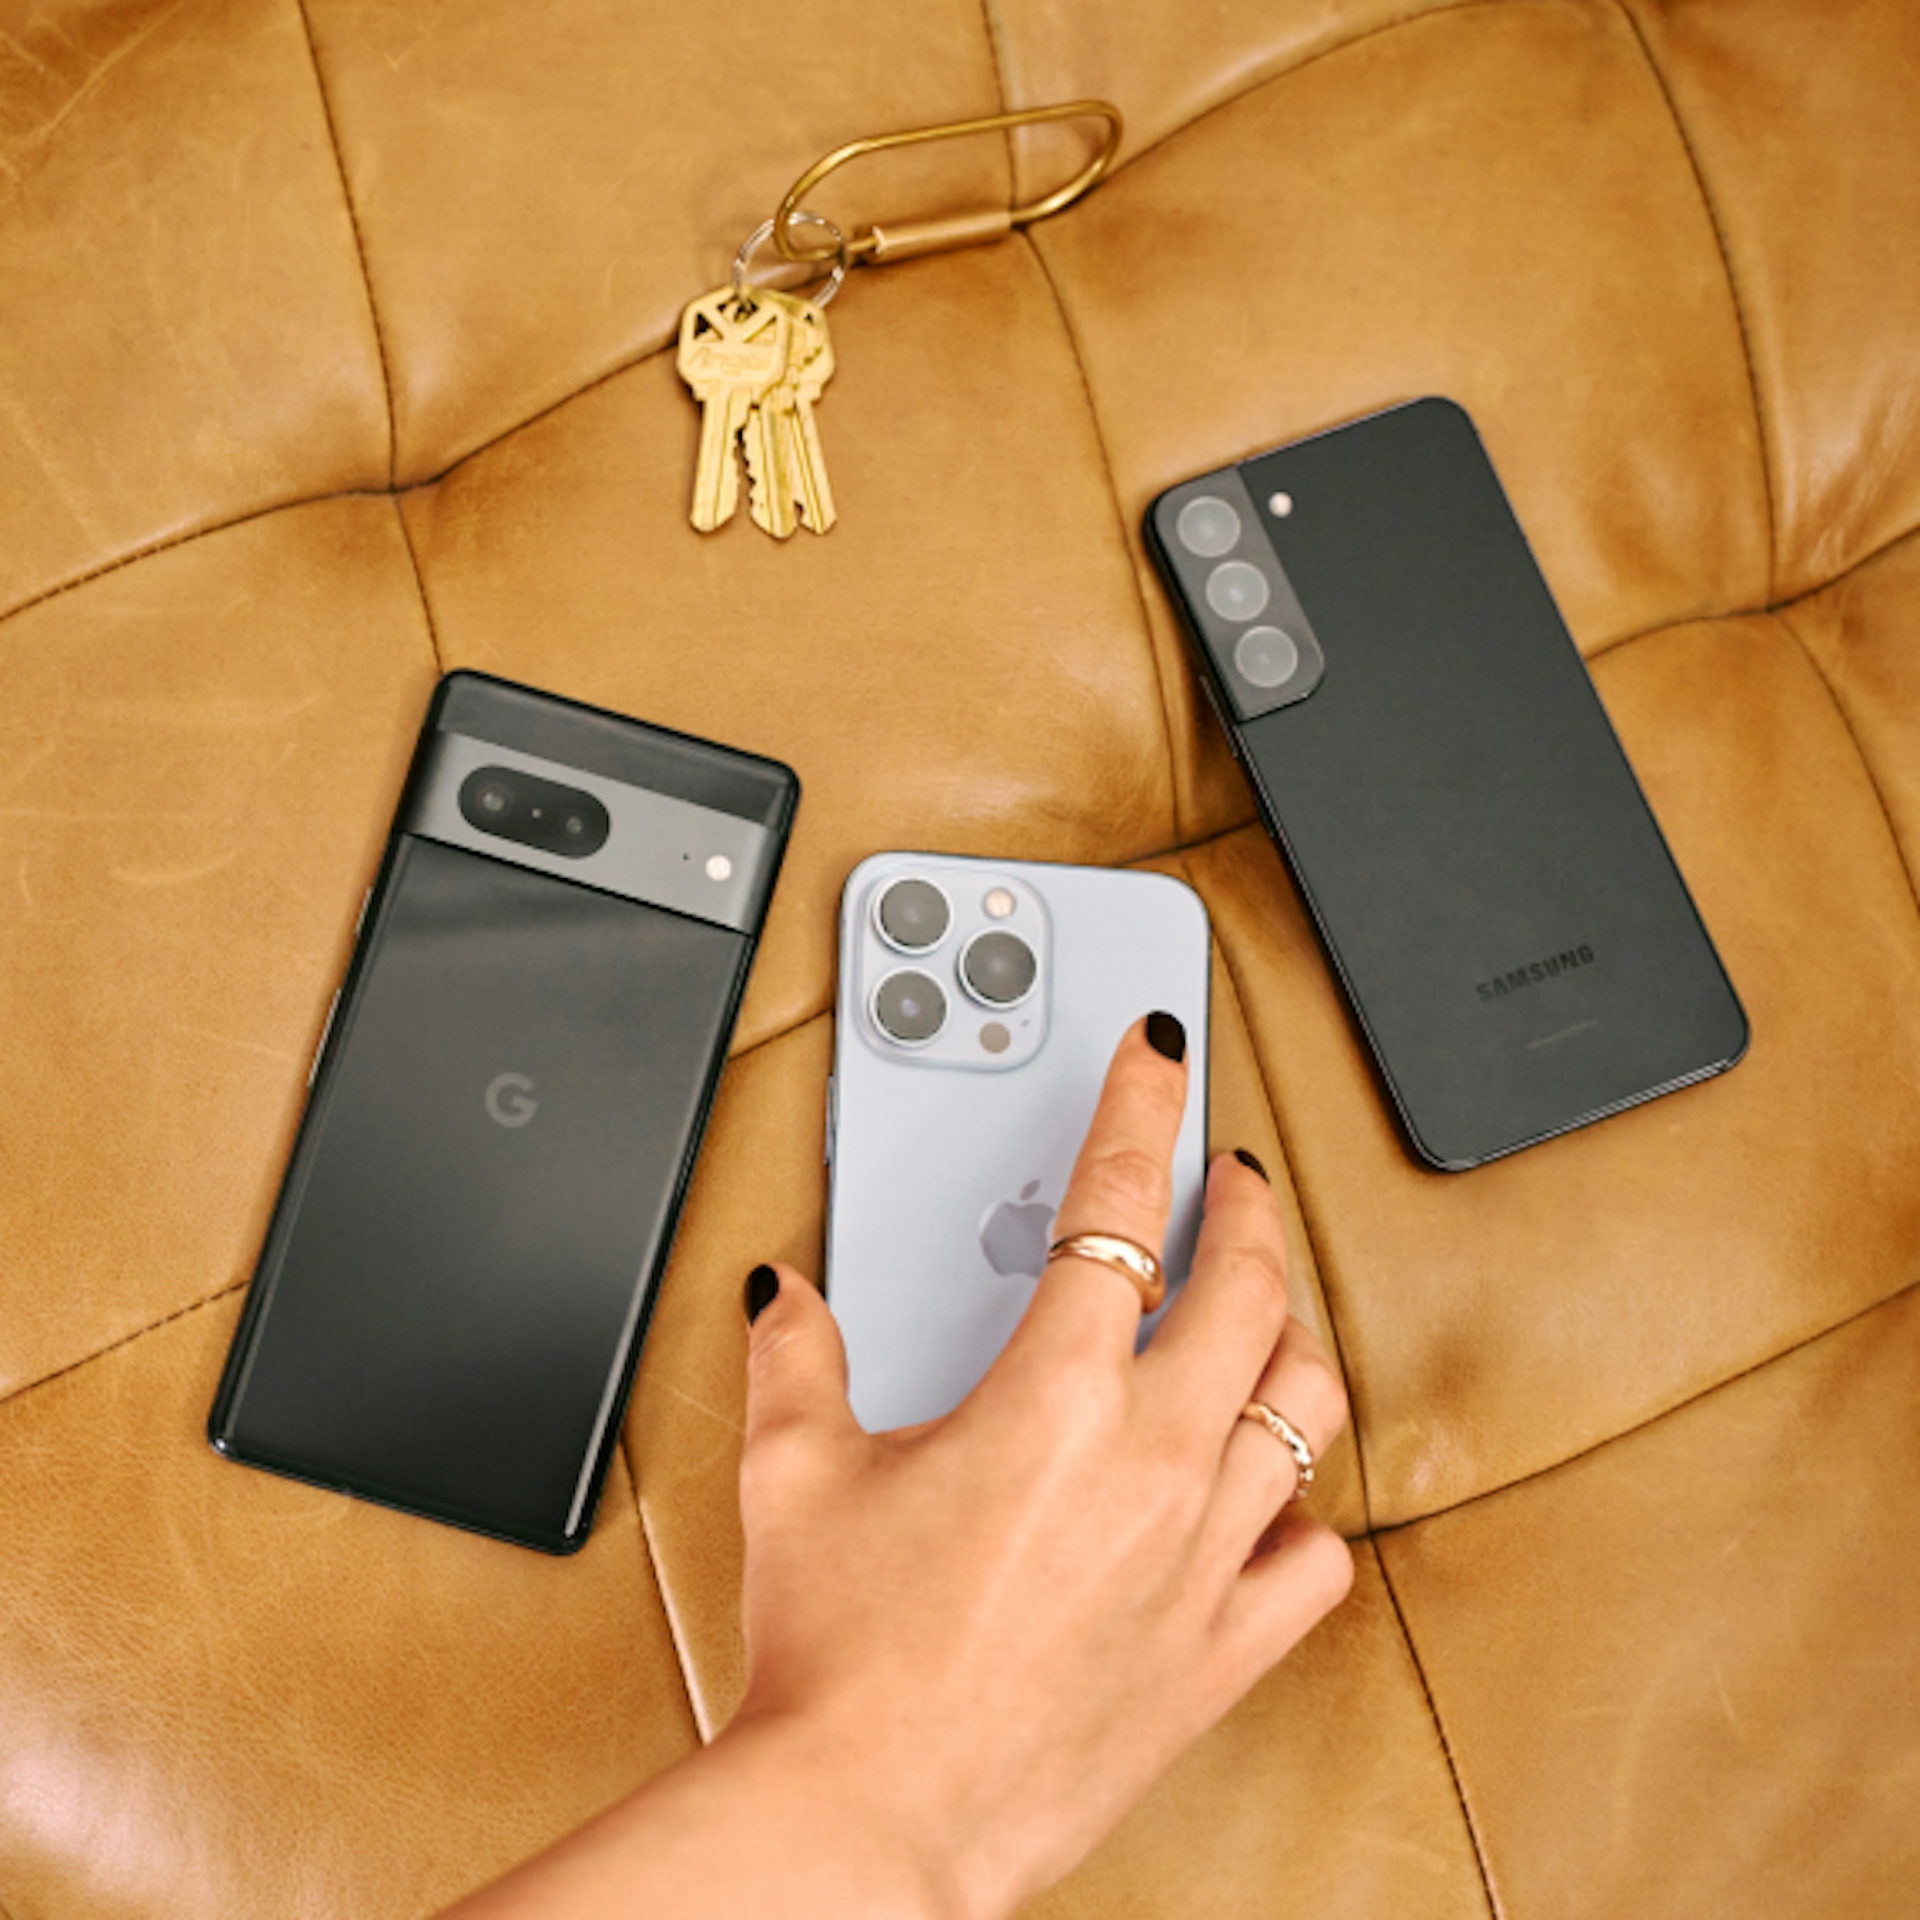 Three smartphones (Google, Apple, and Samsung) are placed on a tan leather surface alongside a set of keys. A hand with black nail polish and gold rings is reaching for the iPhone.